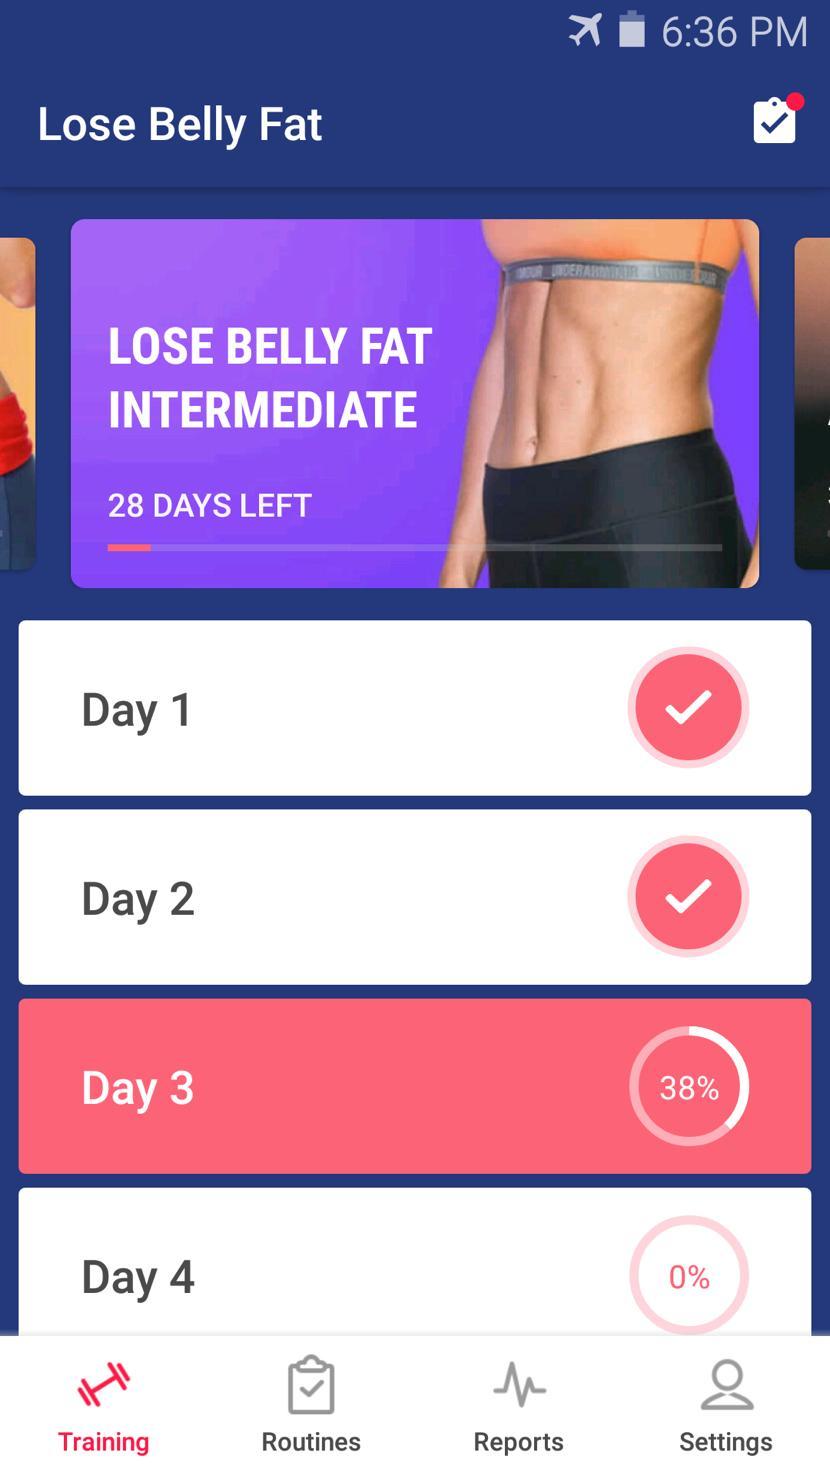 Lose Belly Fat at Home - Lose Weight Flat Stomach 1.3.5 Screenshot 8